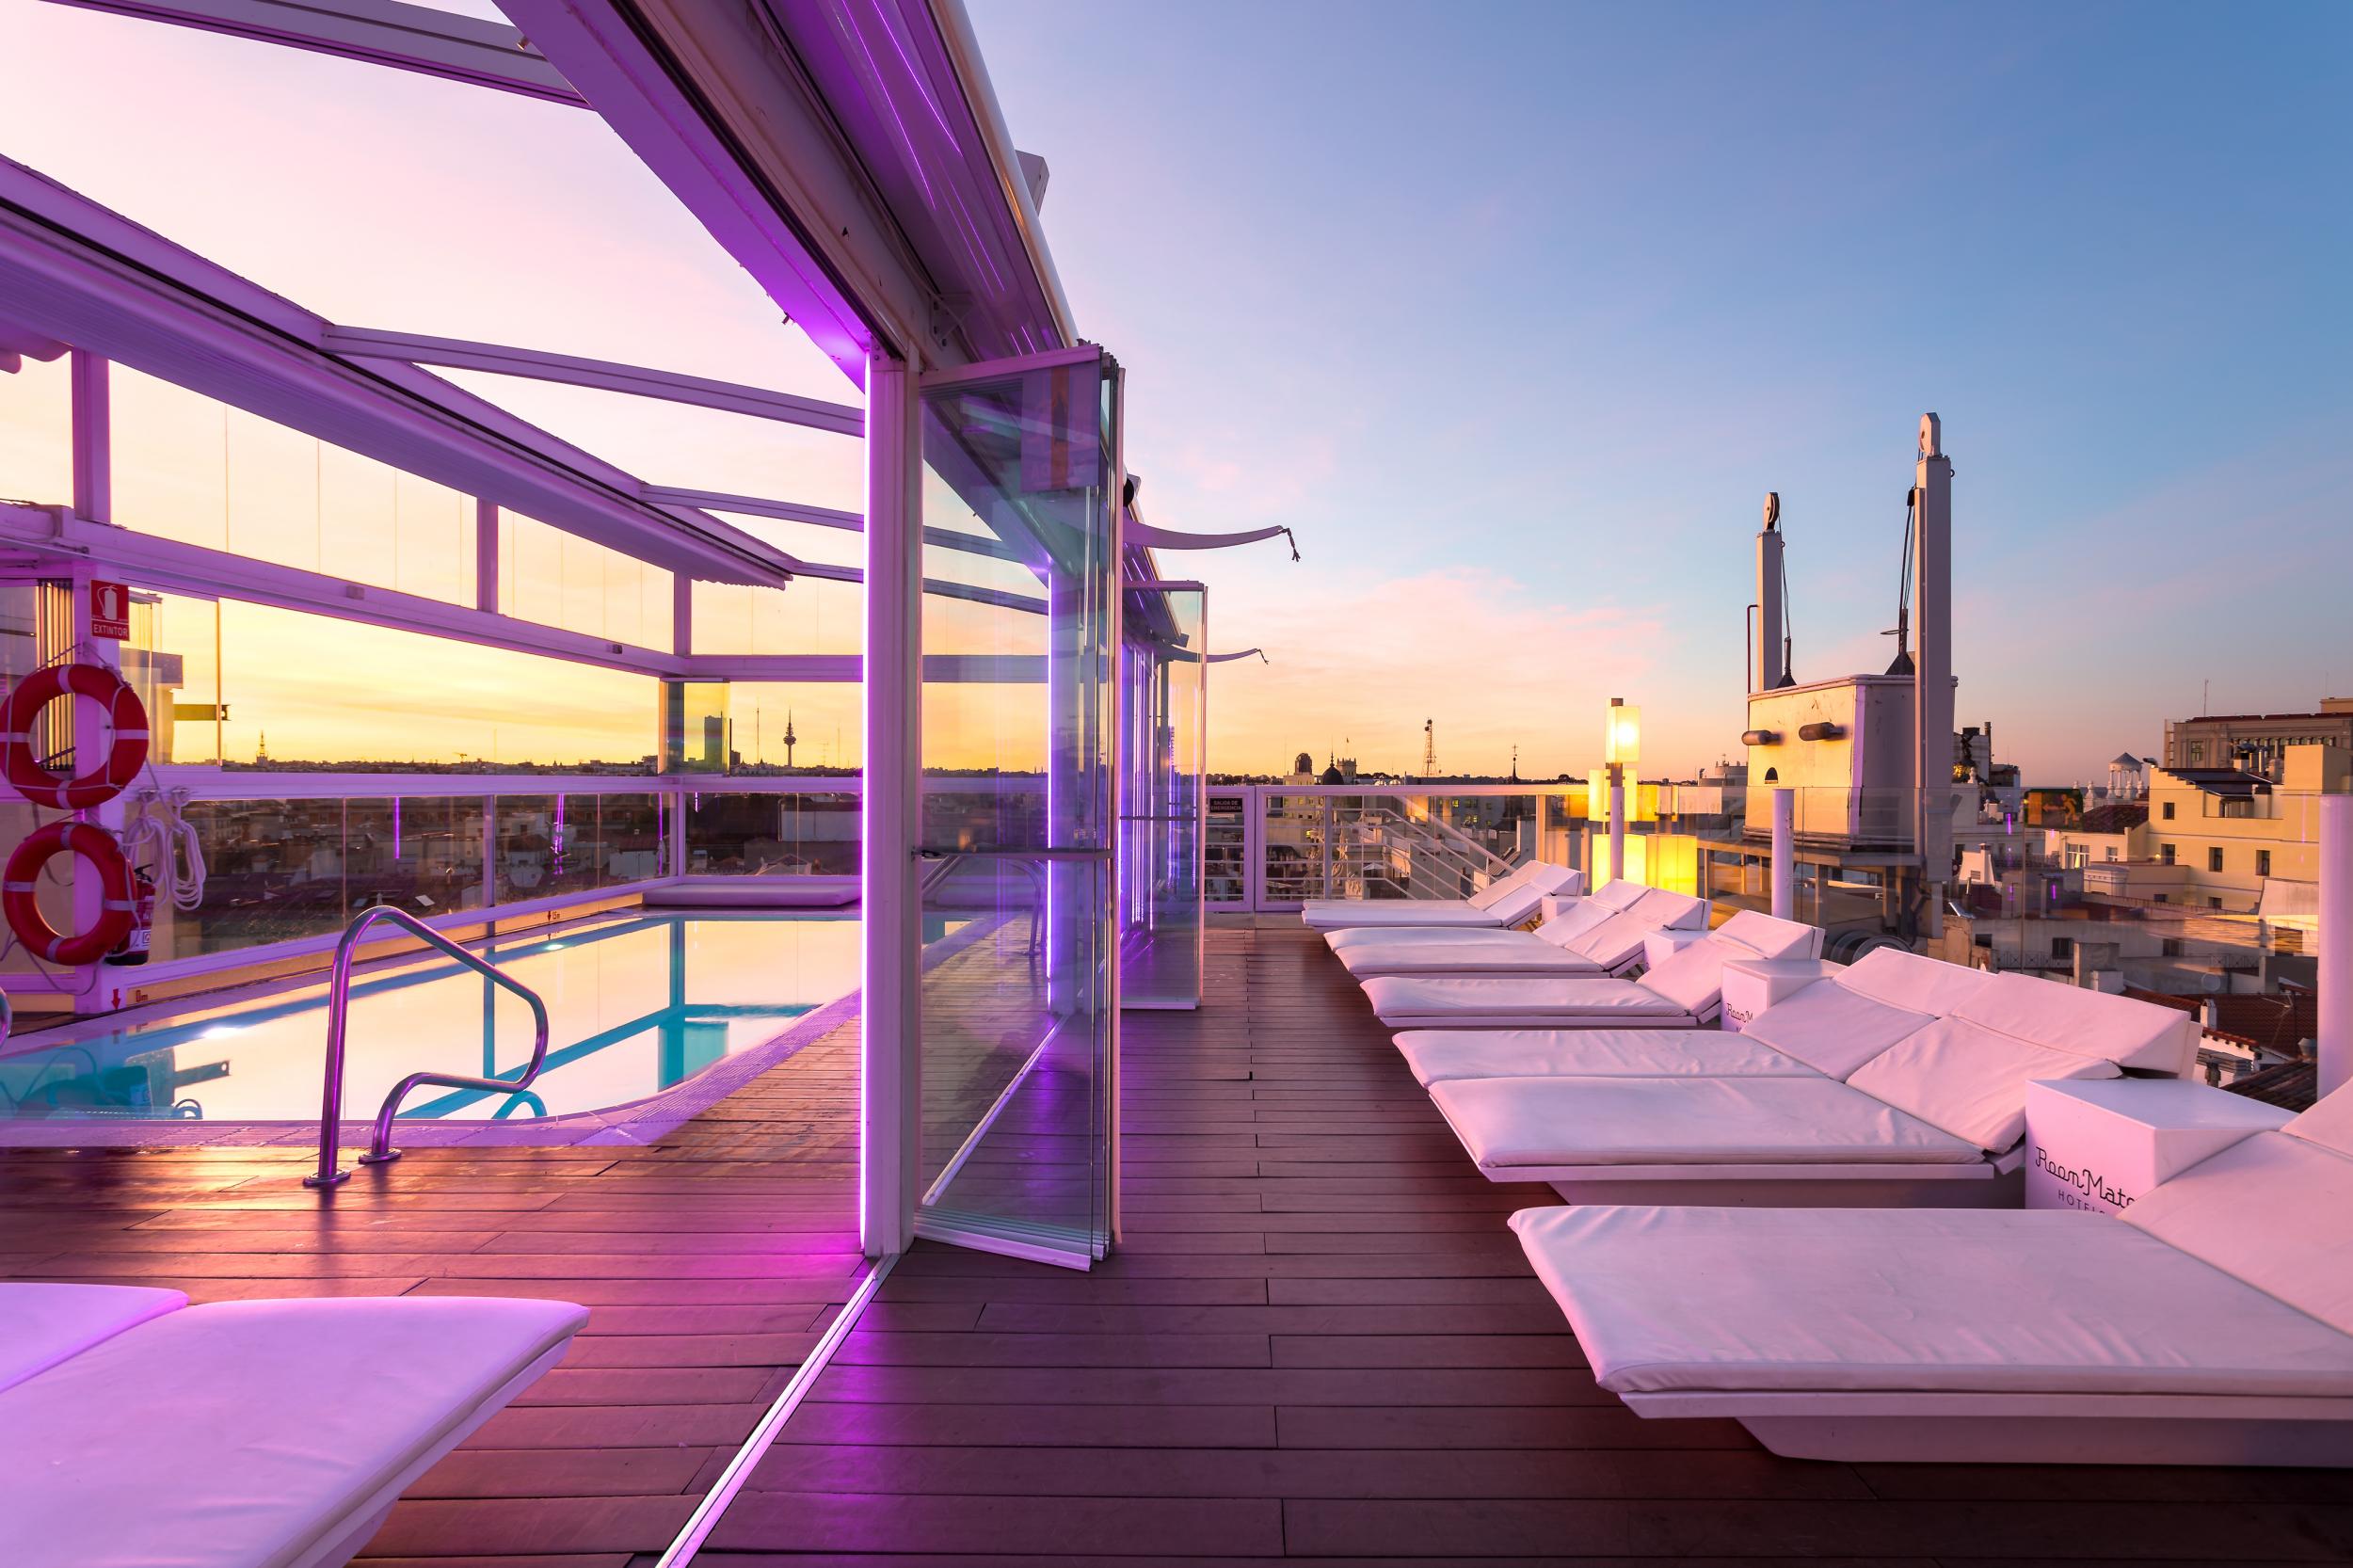 Room Mate Óscar's rooftop pool area is one of the most fashionable summer hang-outs in Madrid